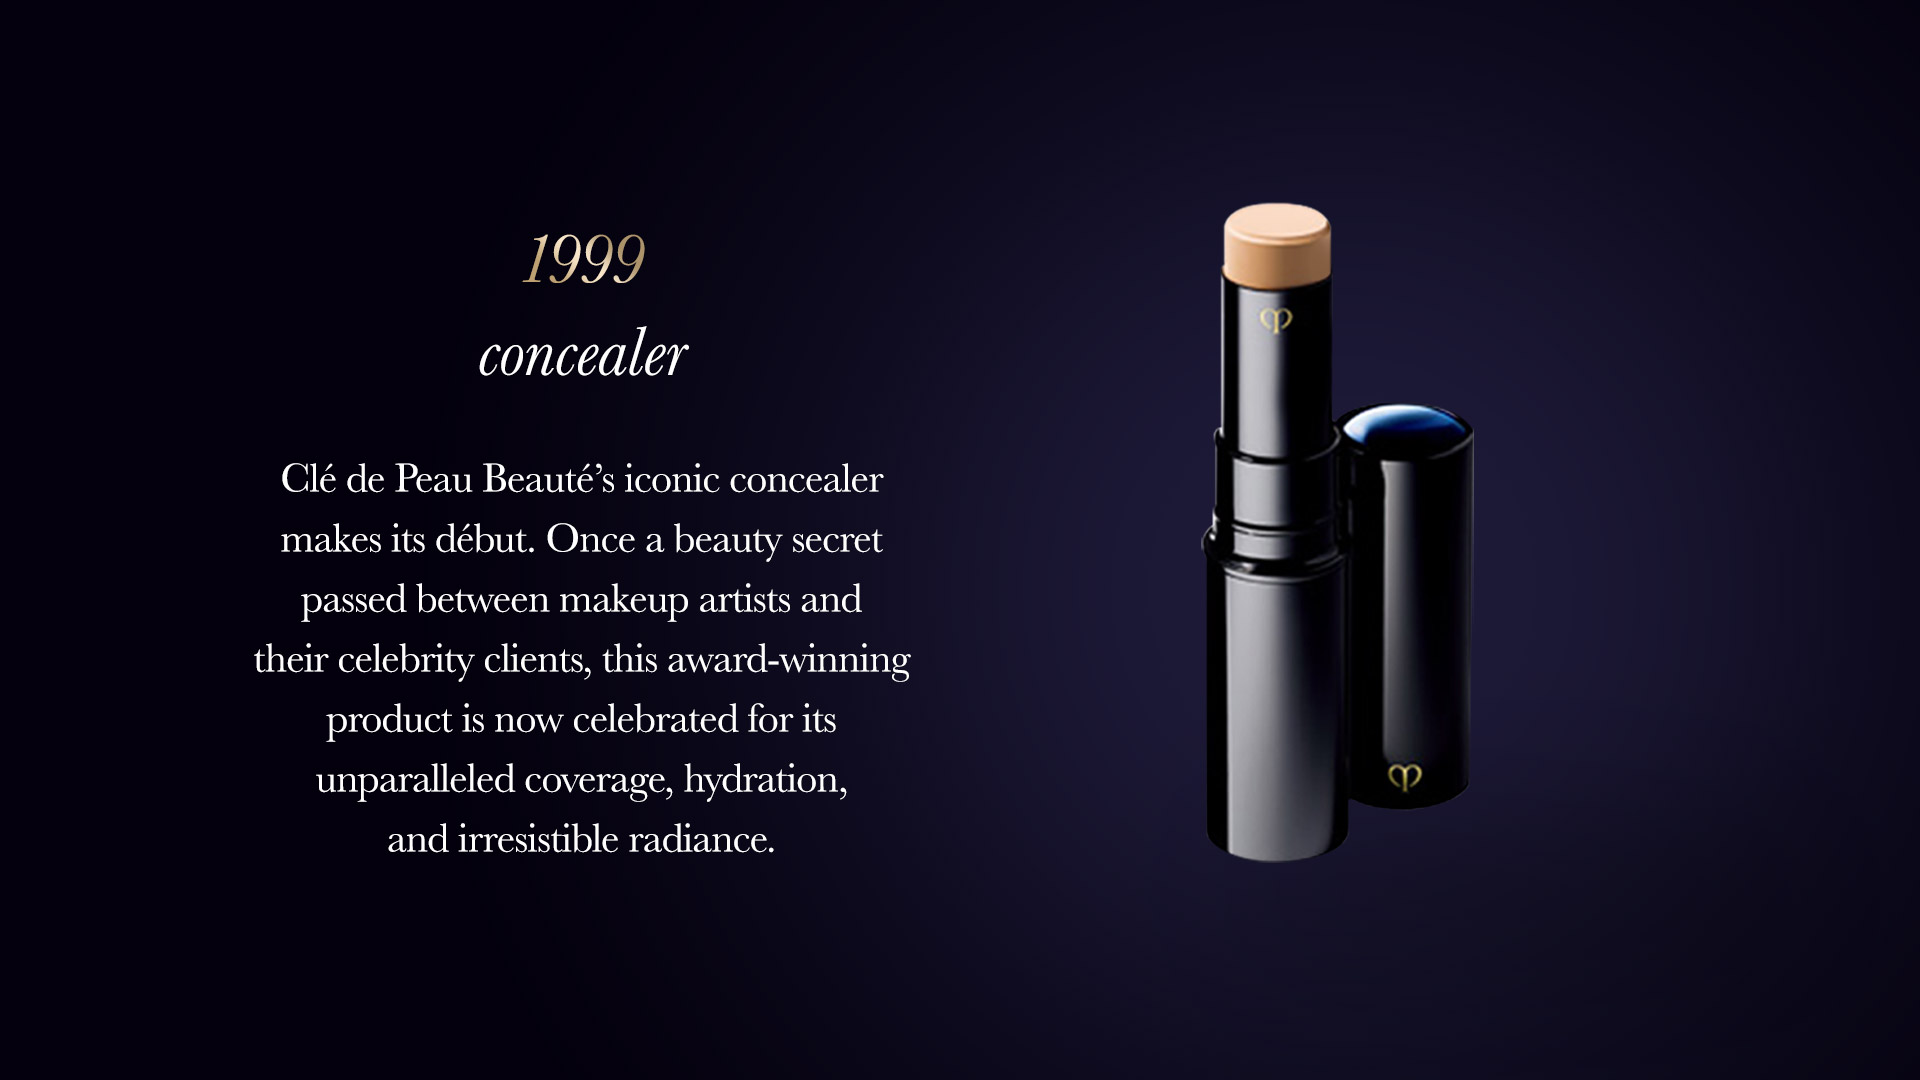 Clé de Peau Beauté’s iconic Concealer makes its début. Once a beauty secret passed between makeup artists and their celebrity clients, this award-winning product is now celebrated for its unparalleled coverage, hydration, and irresistible radiance. 